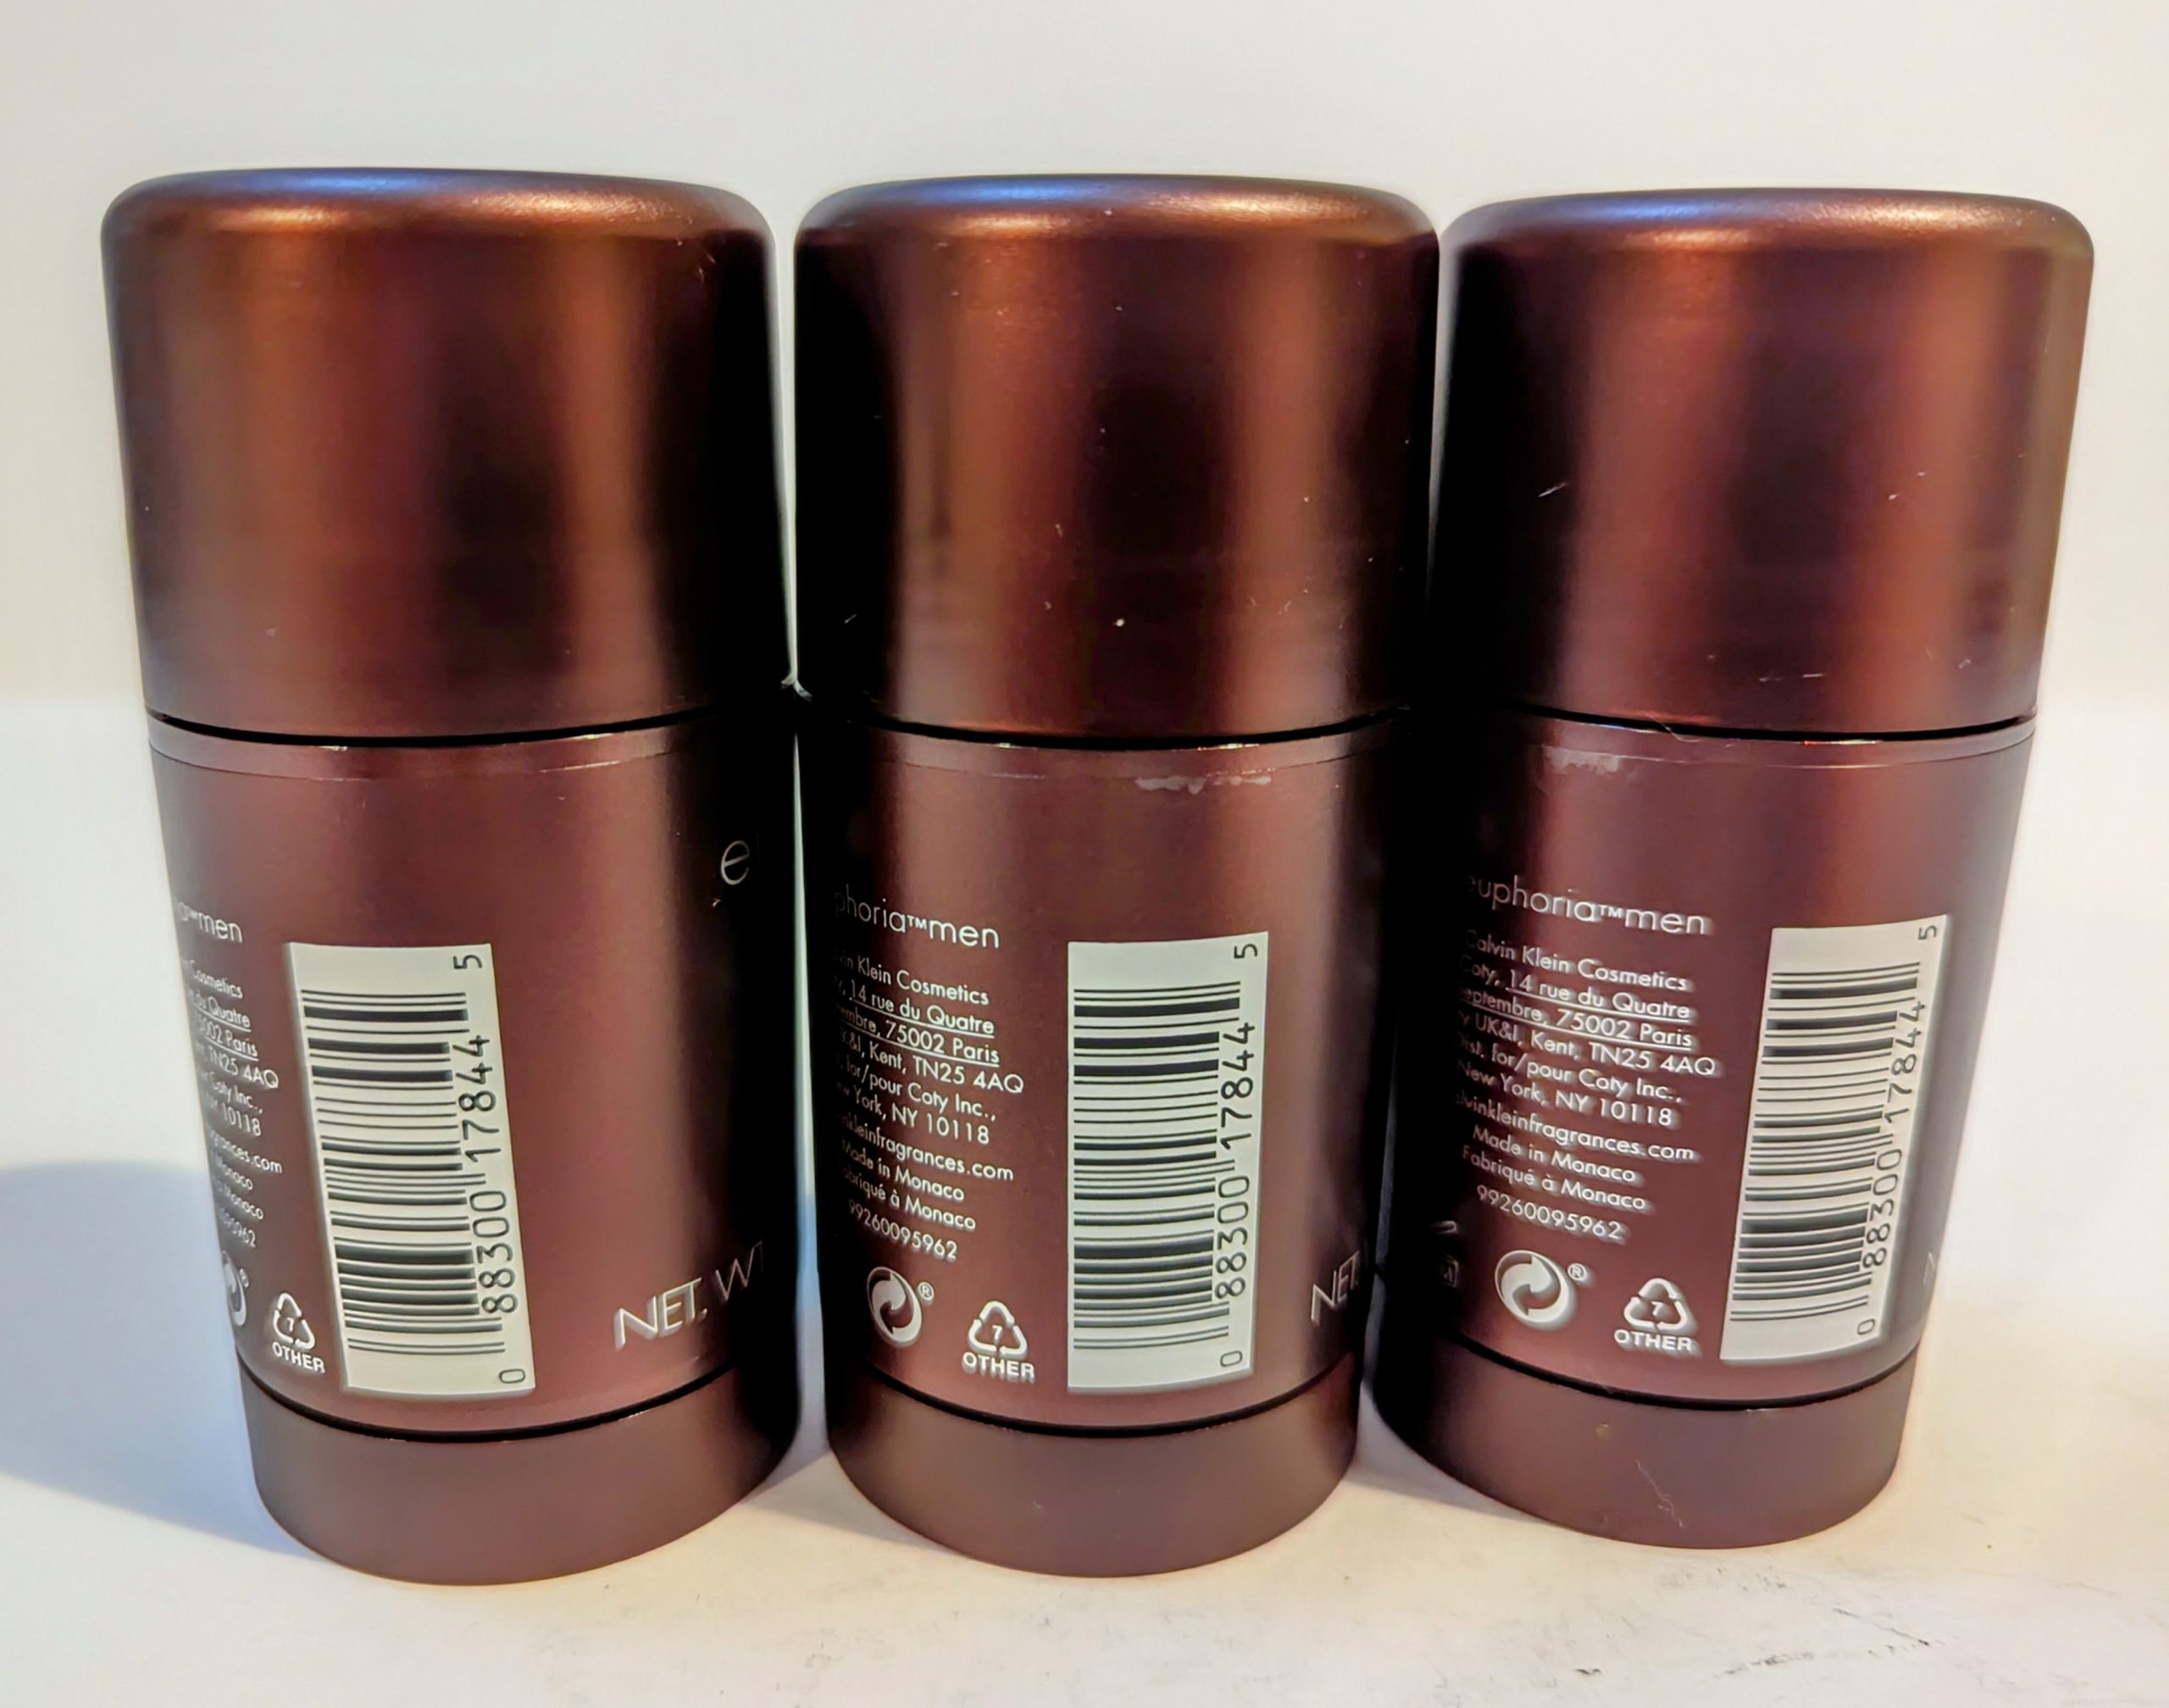 Three brown cylindrical deodorant sticks are placed side by side with their backs facing the camera, displaying the product labels and barcodes.